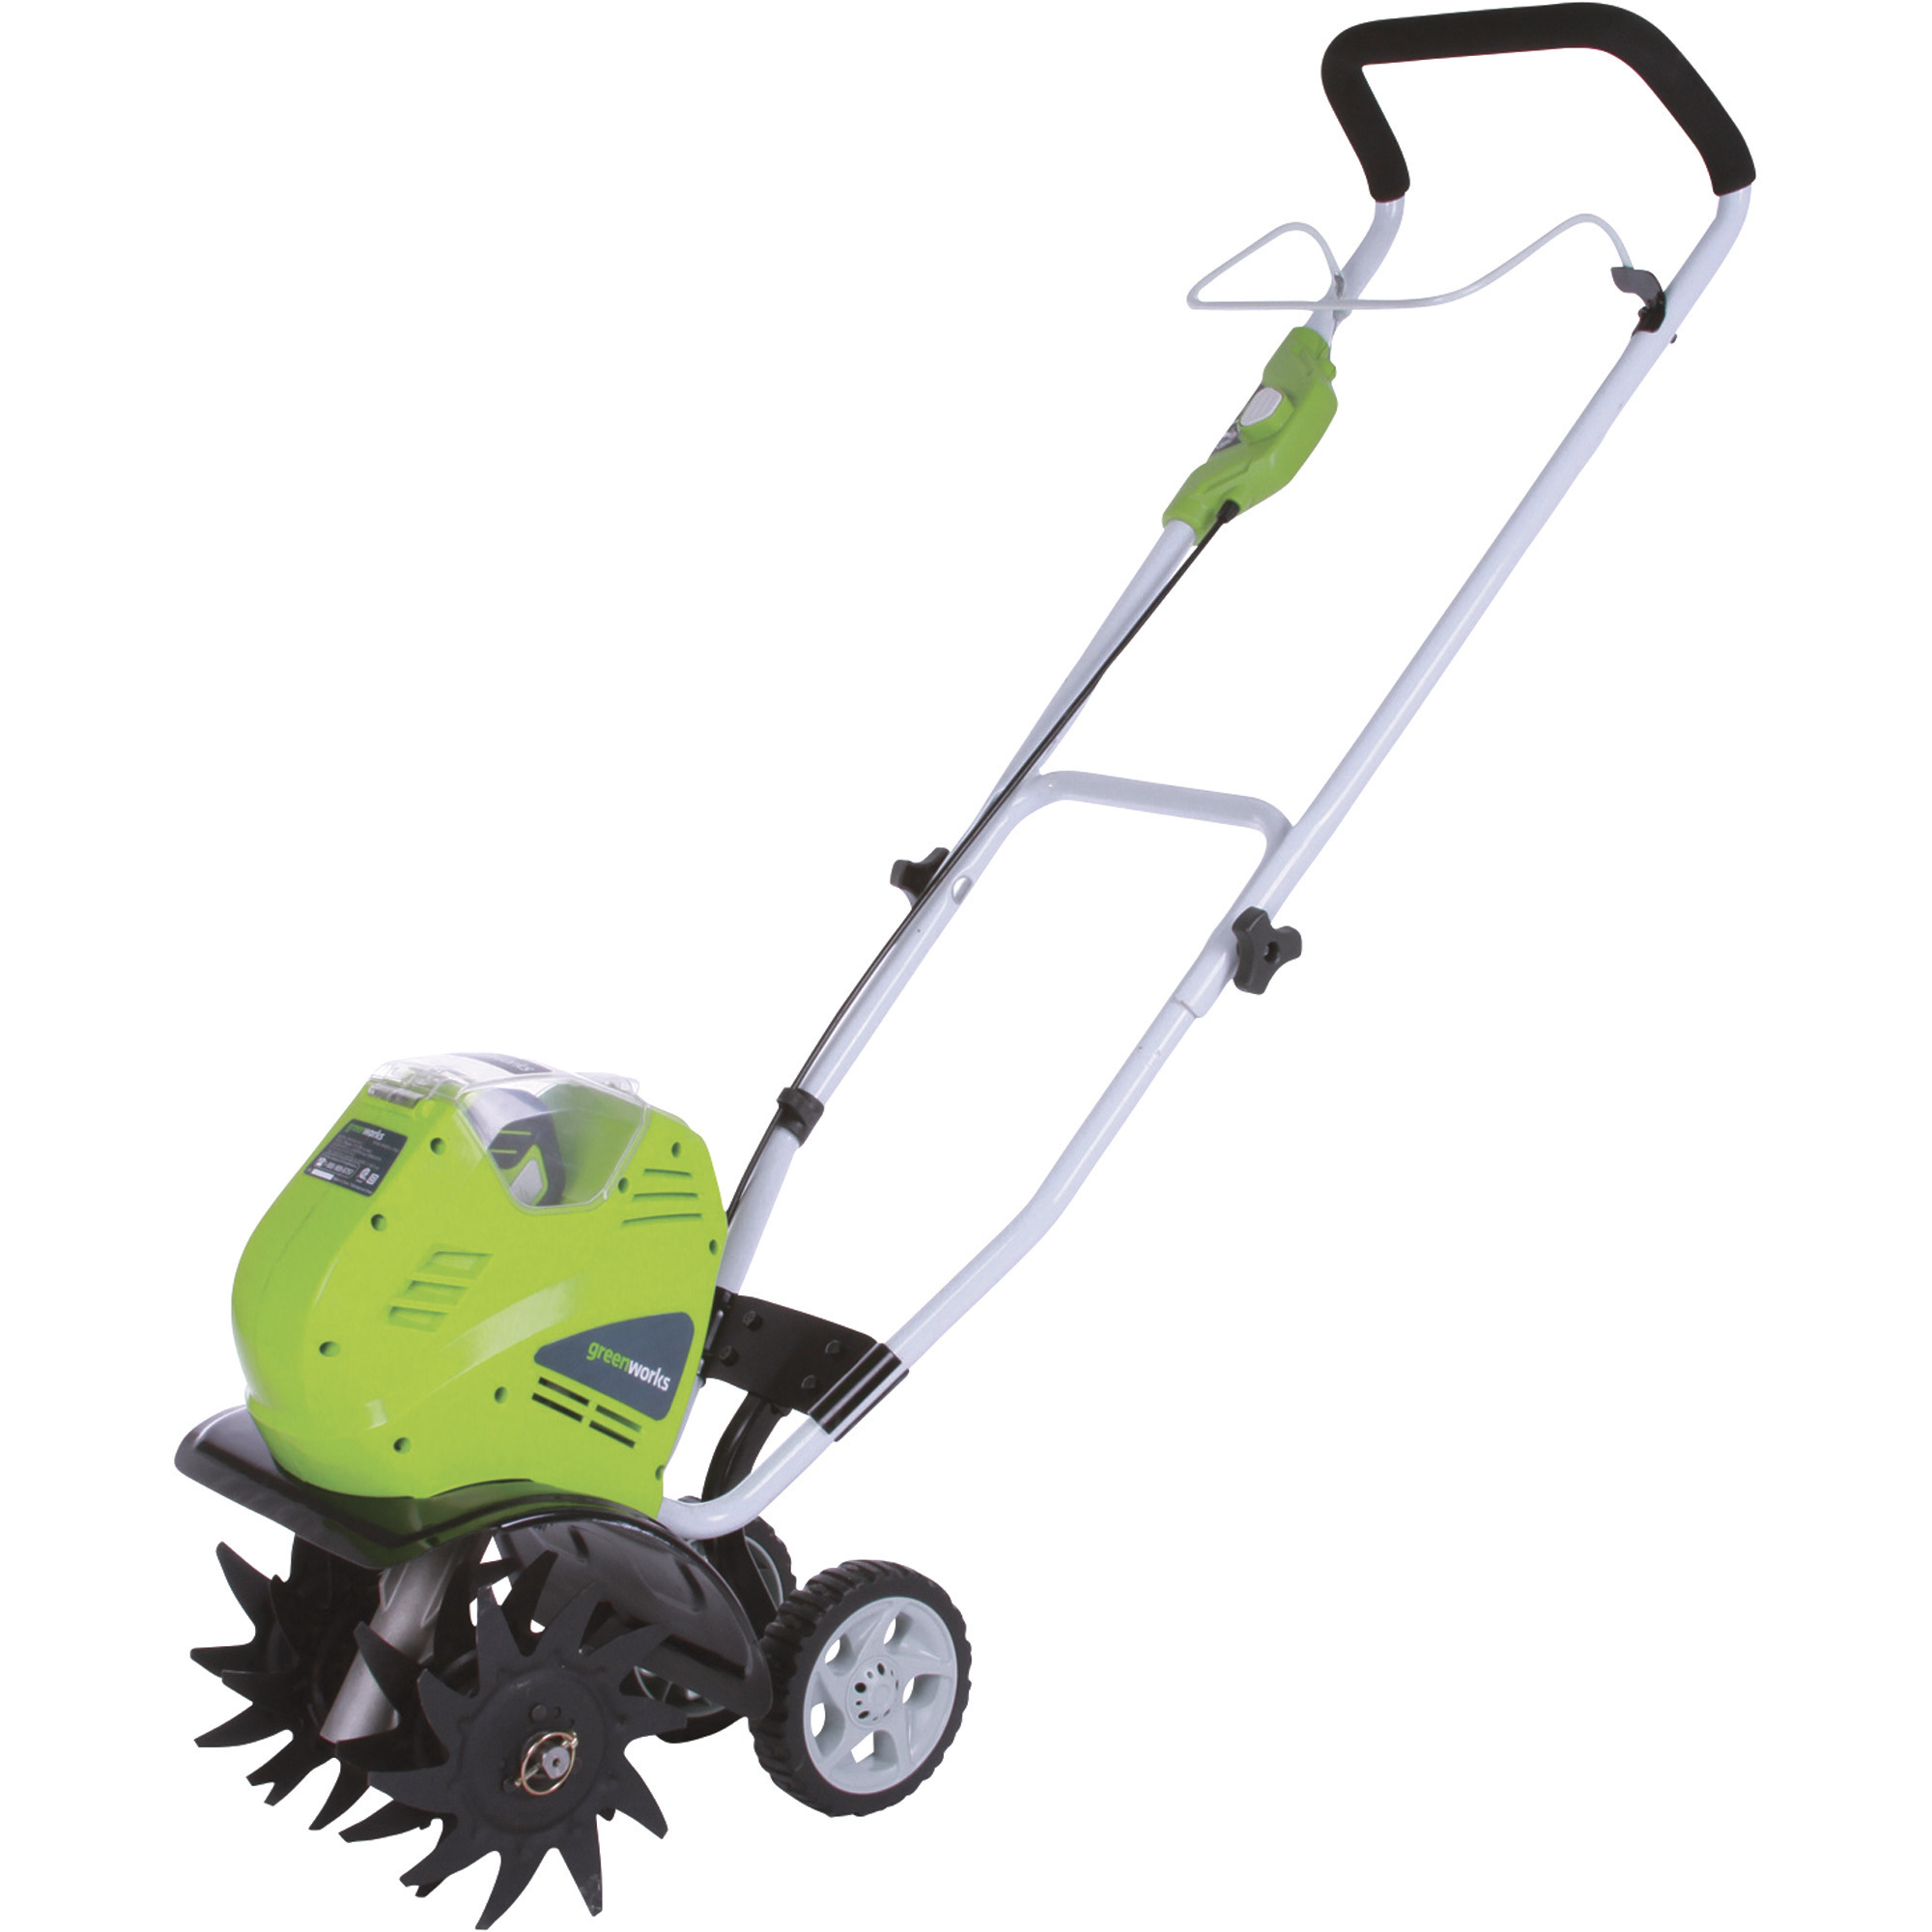 Greenworks 40V Lithium-Ion Cordless Cultivator, 8 1/4Inch to 10Inch Working Width, Model 27062